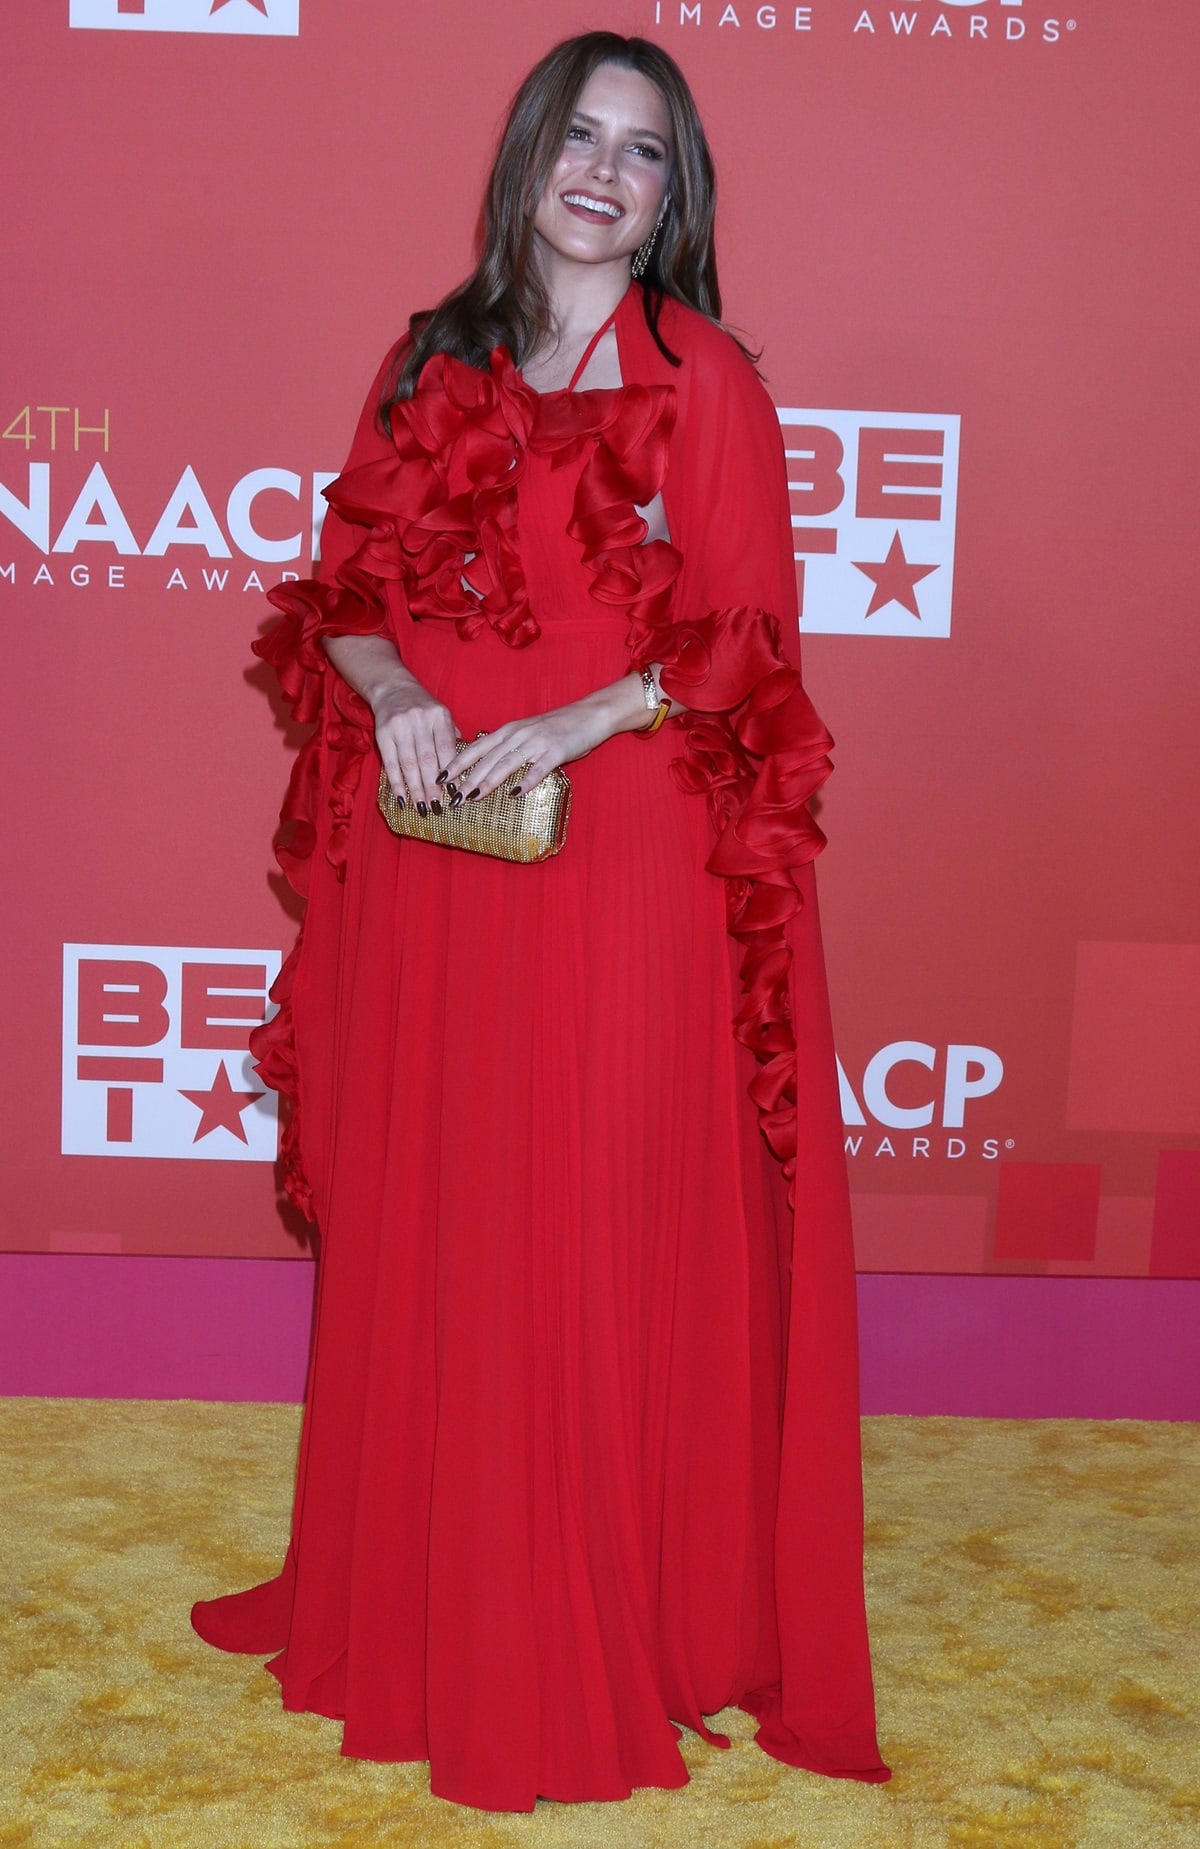 Sophia Bush looked stunning in a flowing, ruffled red dress at the 54th NAACP Image Awards